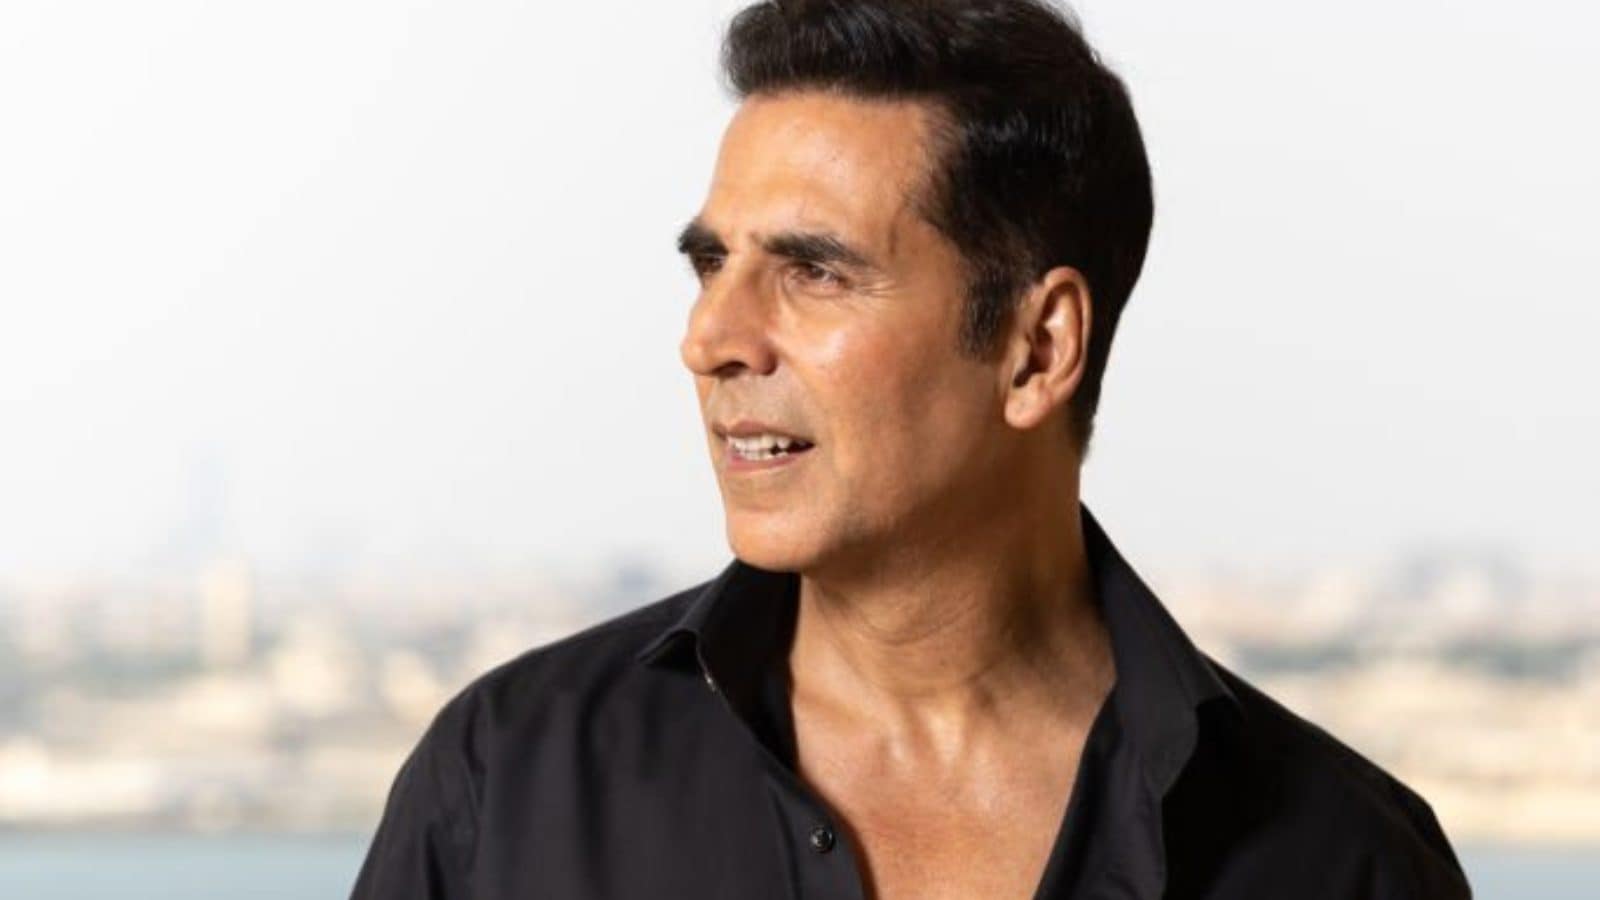 Akshay Kumar Xvideo - Akshay Kumar to Make Film on Sex Education; Asked About Doing  'Anti-Pakistan' Film; He Says 'Don't Get Serious' - News18